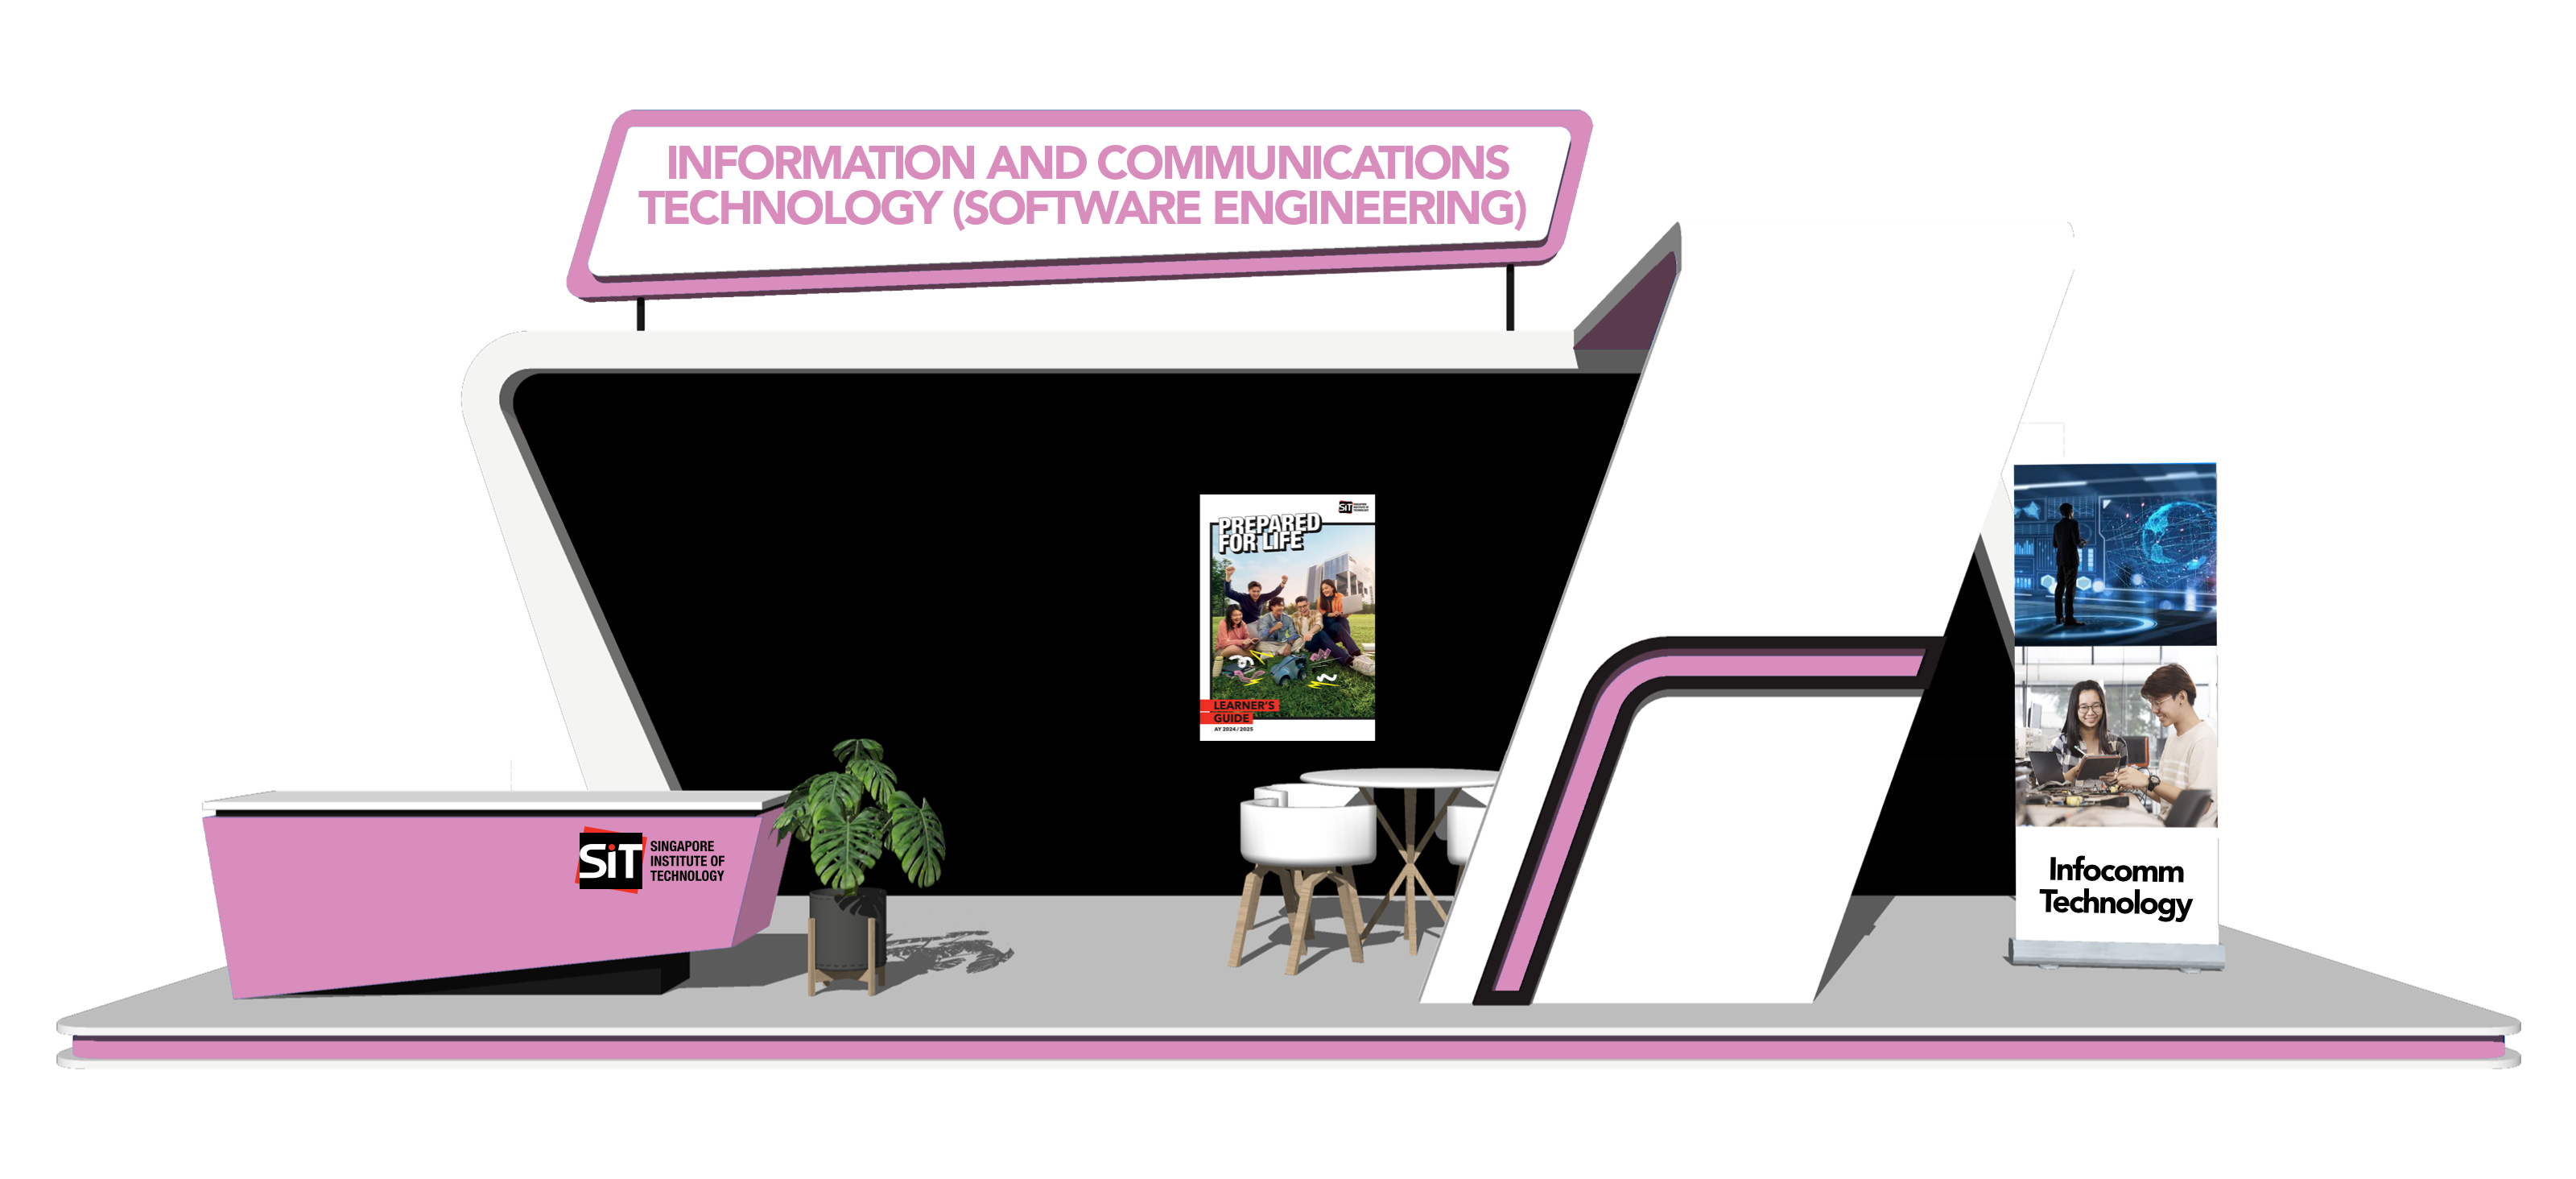 Information and Communications Technology (Software Engineering)